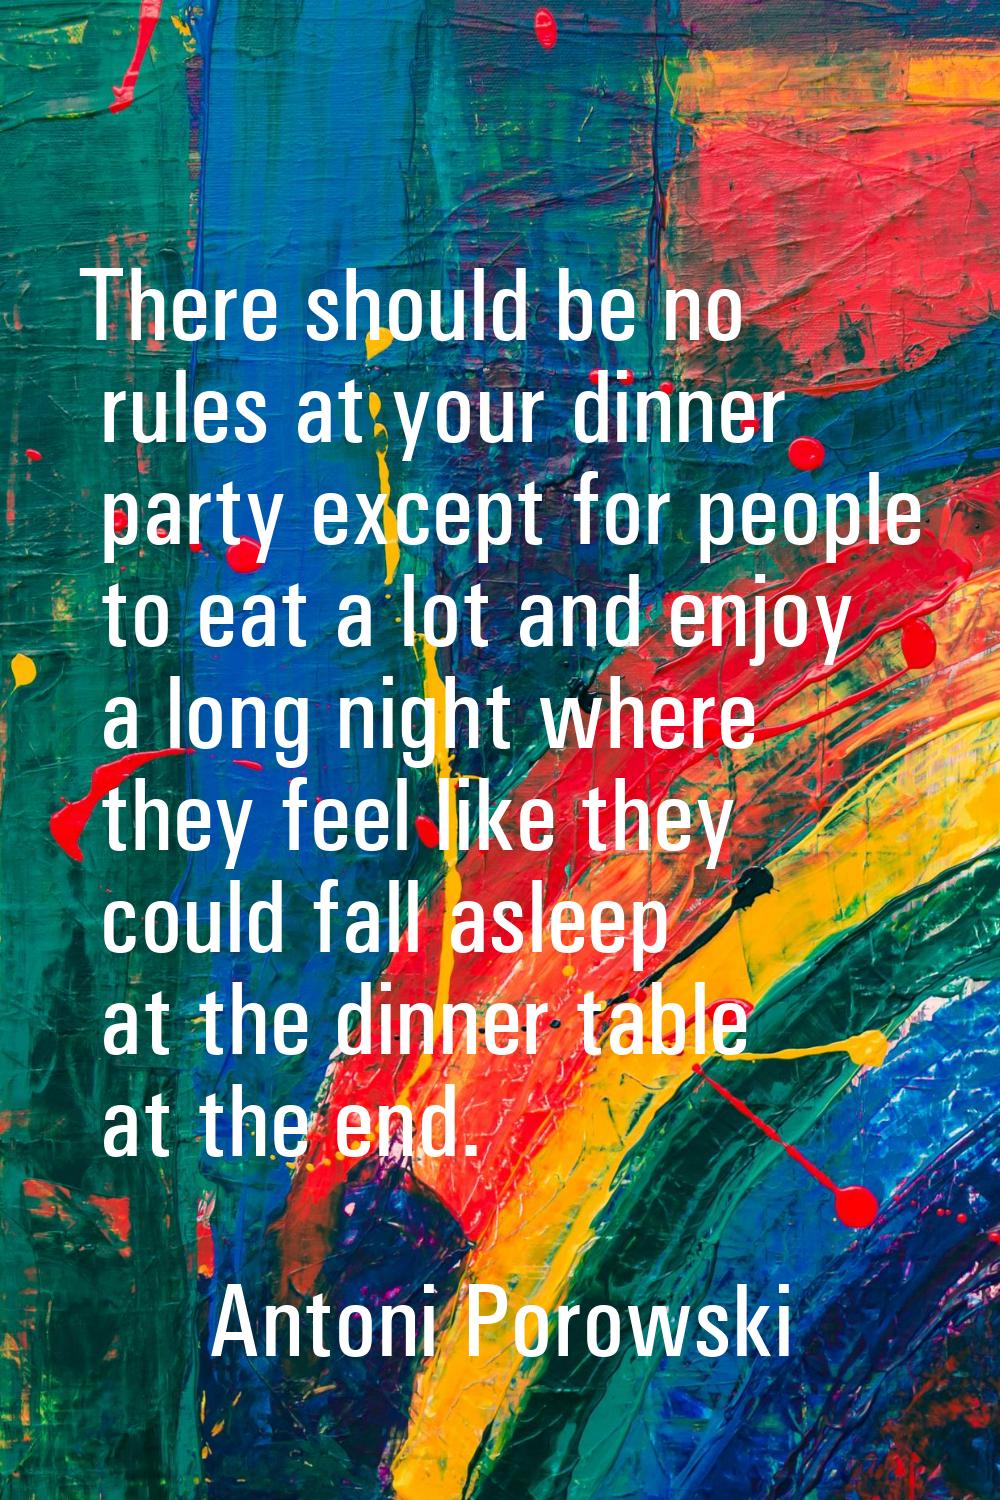 There should be no rules at your dinner party except for people to eat a lot and enjoy a long night